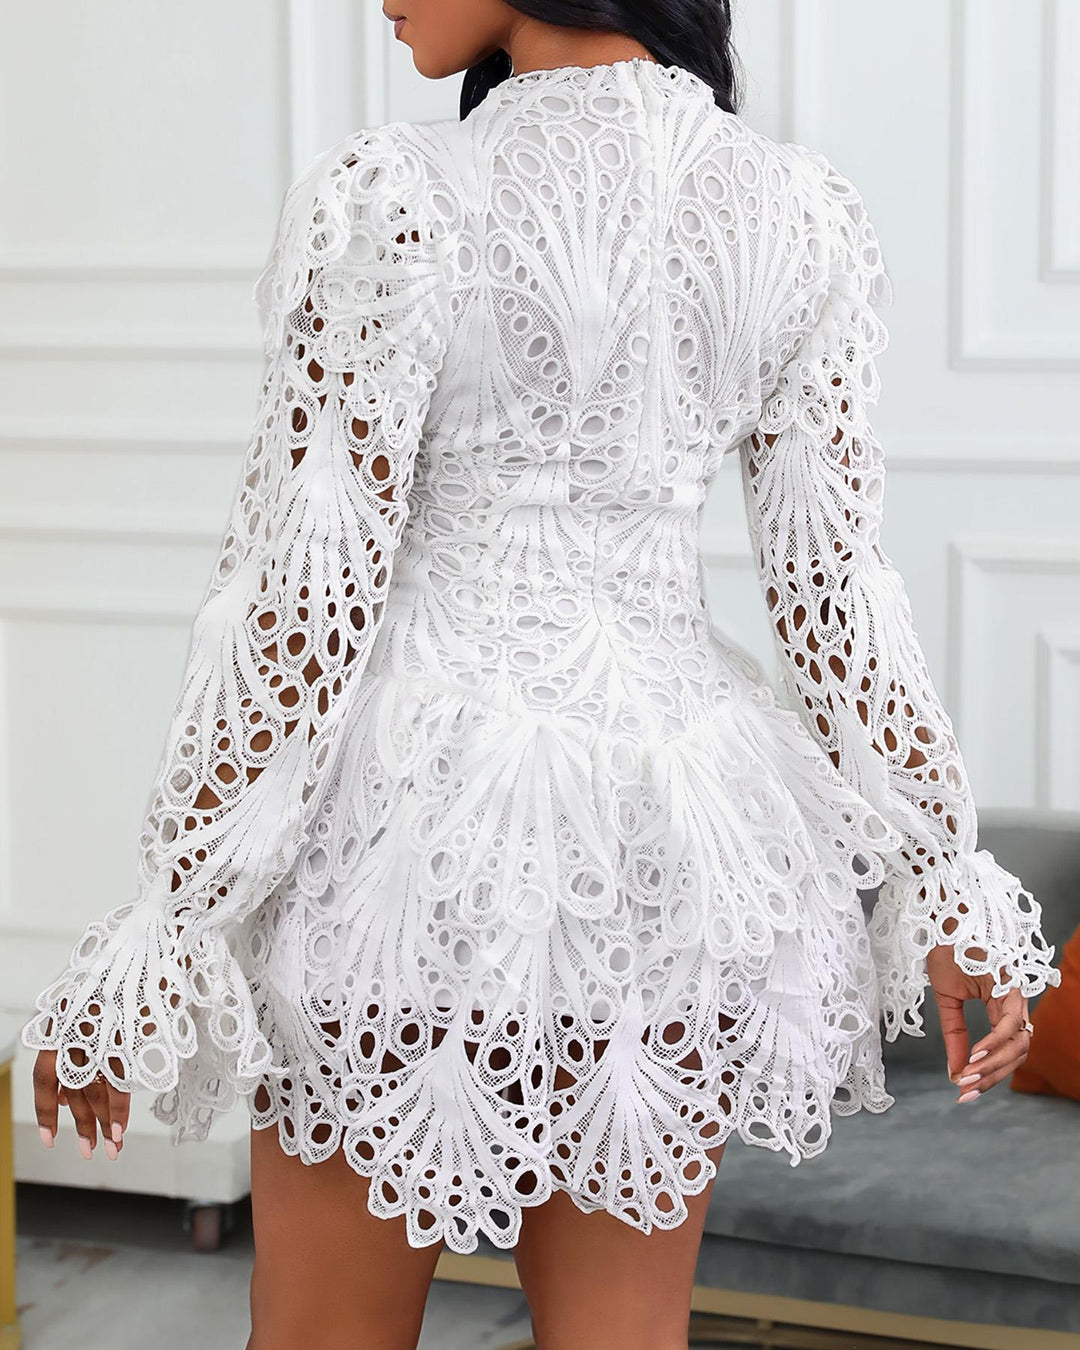 Eyelet Embroidery Bell Sleeve Lace Dress